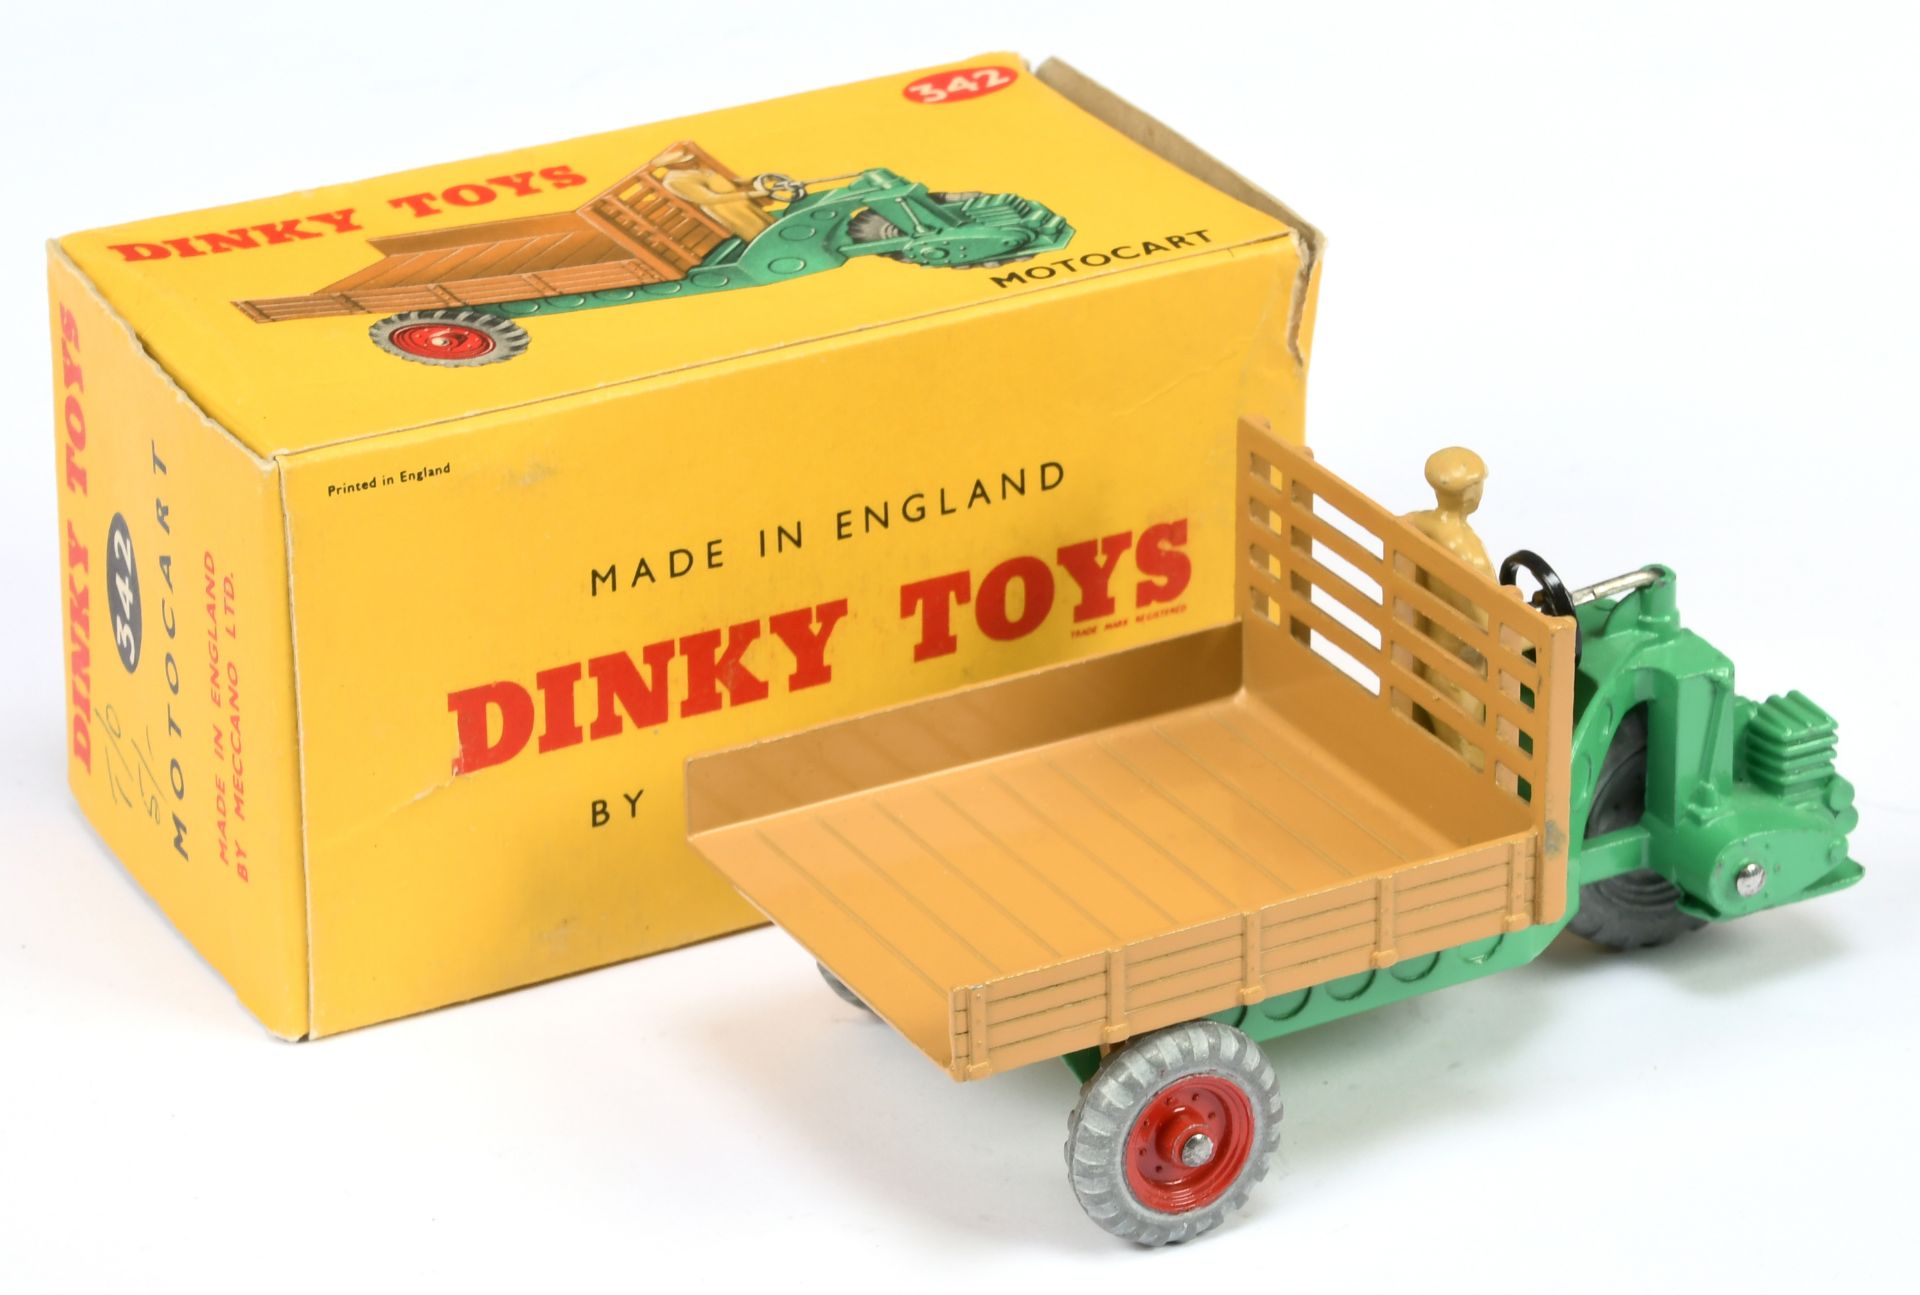 Dinky Toys 342 Motorcart - Mid green including chassis, tan back and figure, red metal wheels  - Bild 2 aus 2